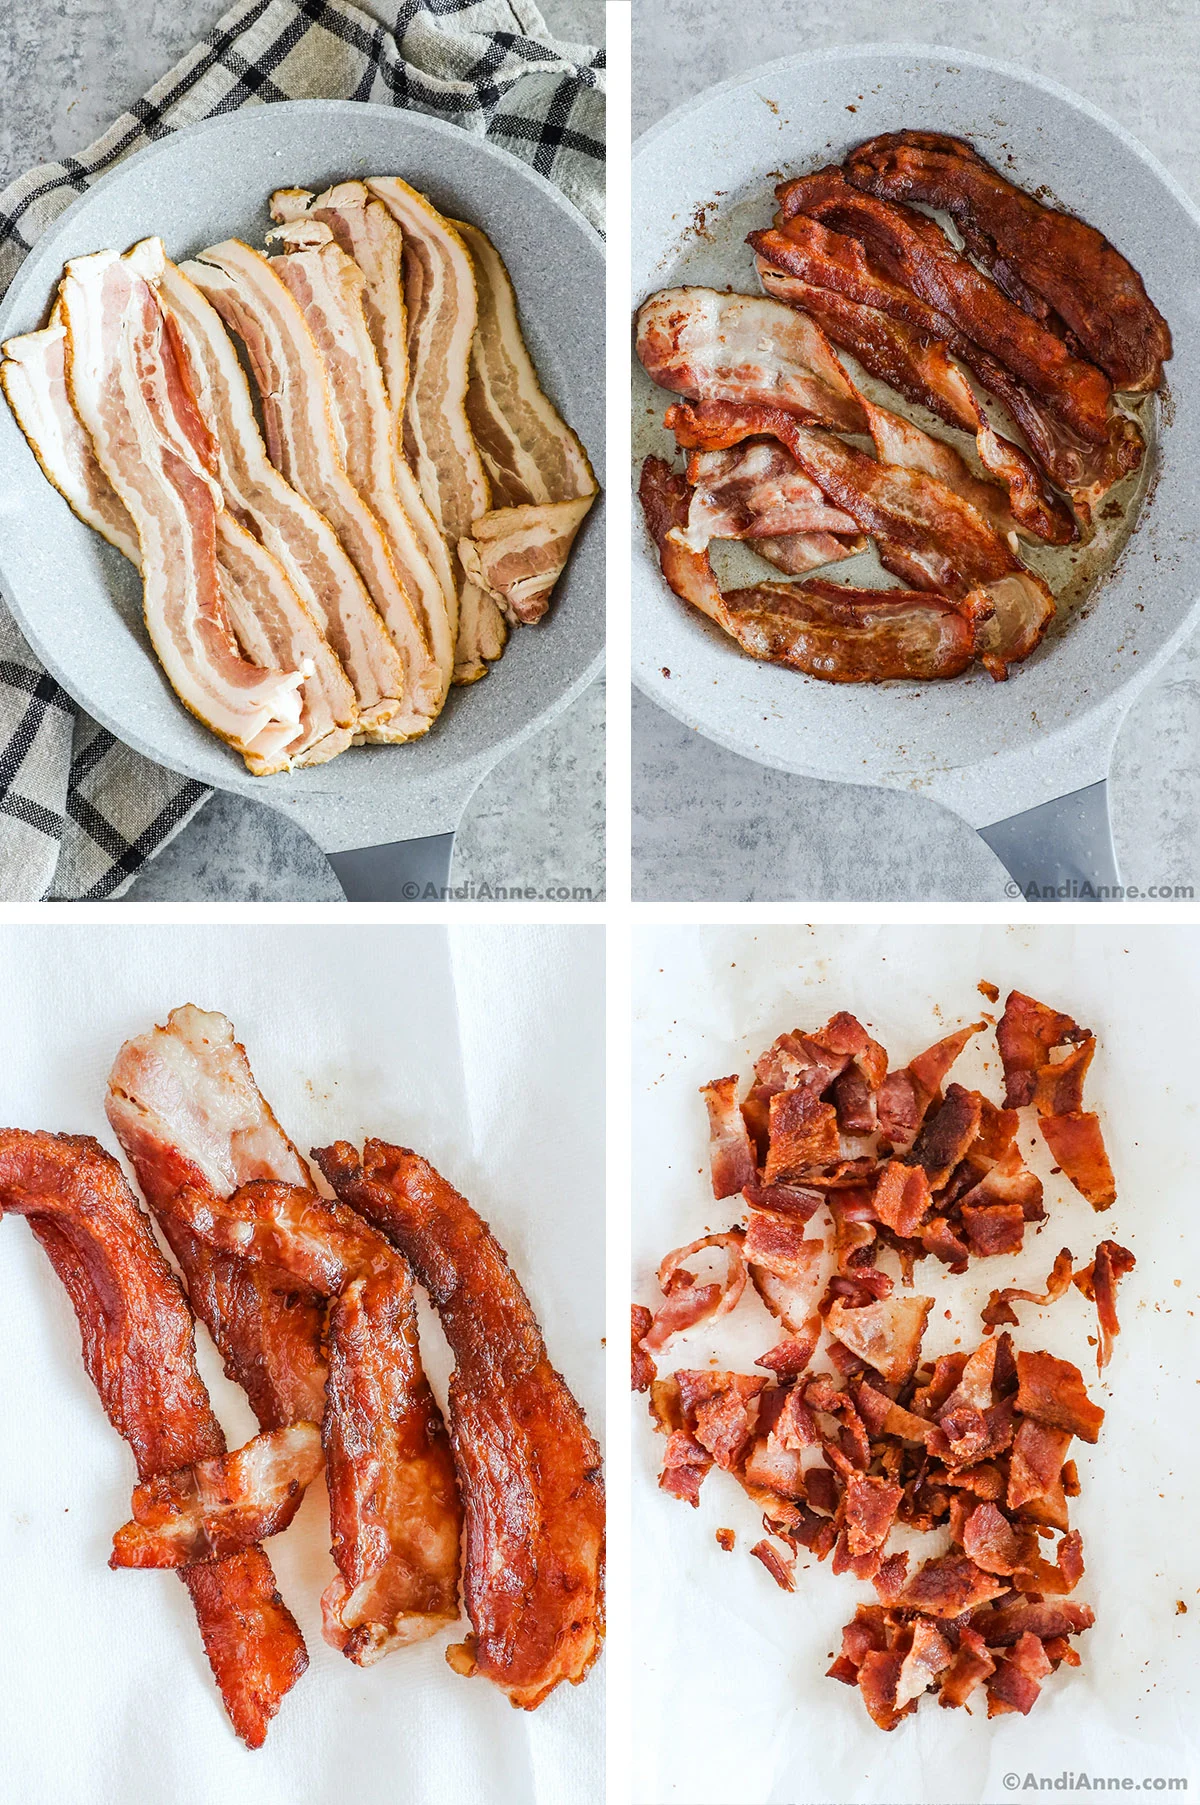 Four images grouped together. First two are of bacon strips in frying pan first raw, then cooked. Third is cooked bacon strips on paper towel, fourth is crumbled bacon strips.